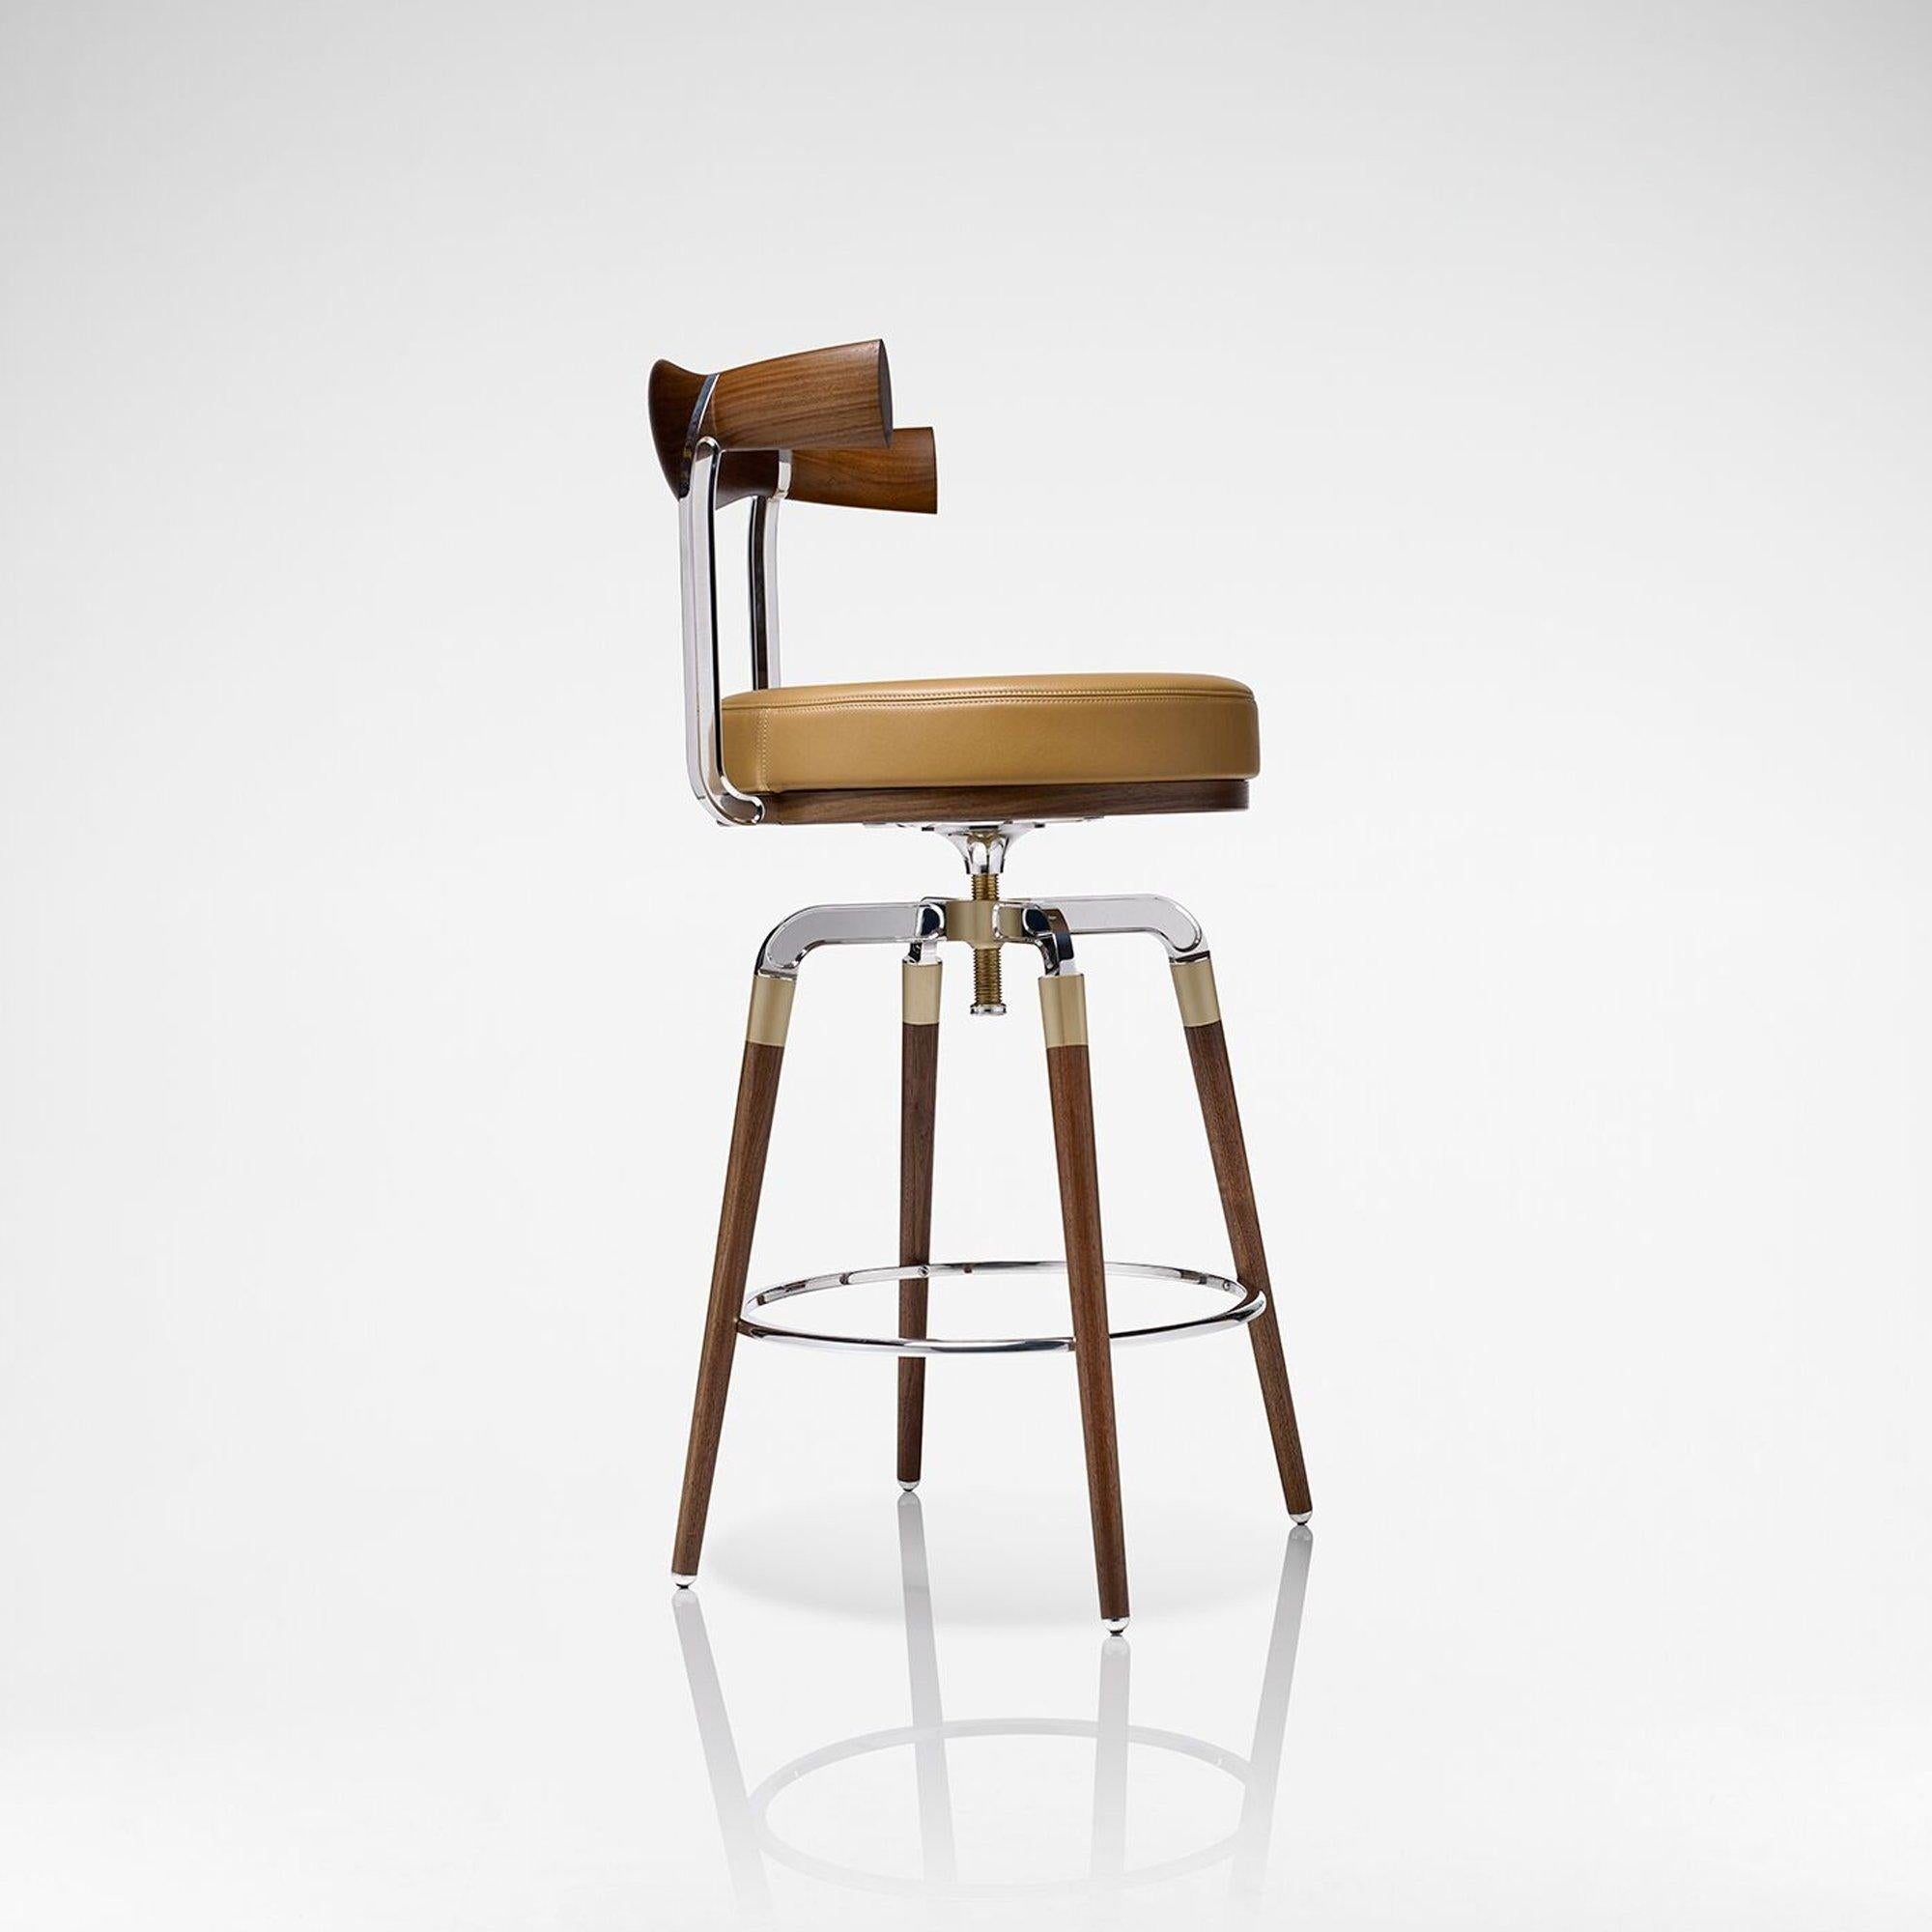 Crafted in walnut, engineered brushed brass and polished aluminum, the rifle bar stool has an adjustable seat height making this ideal for your home bar.

The curved seat rest of the chair and distinctive barrel-shaped legs are a continued